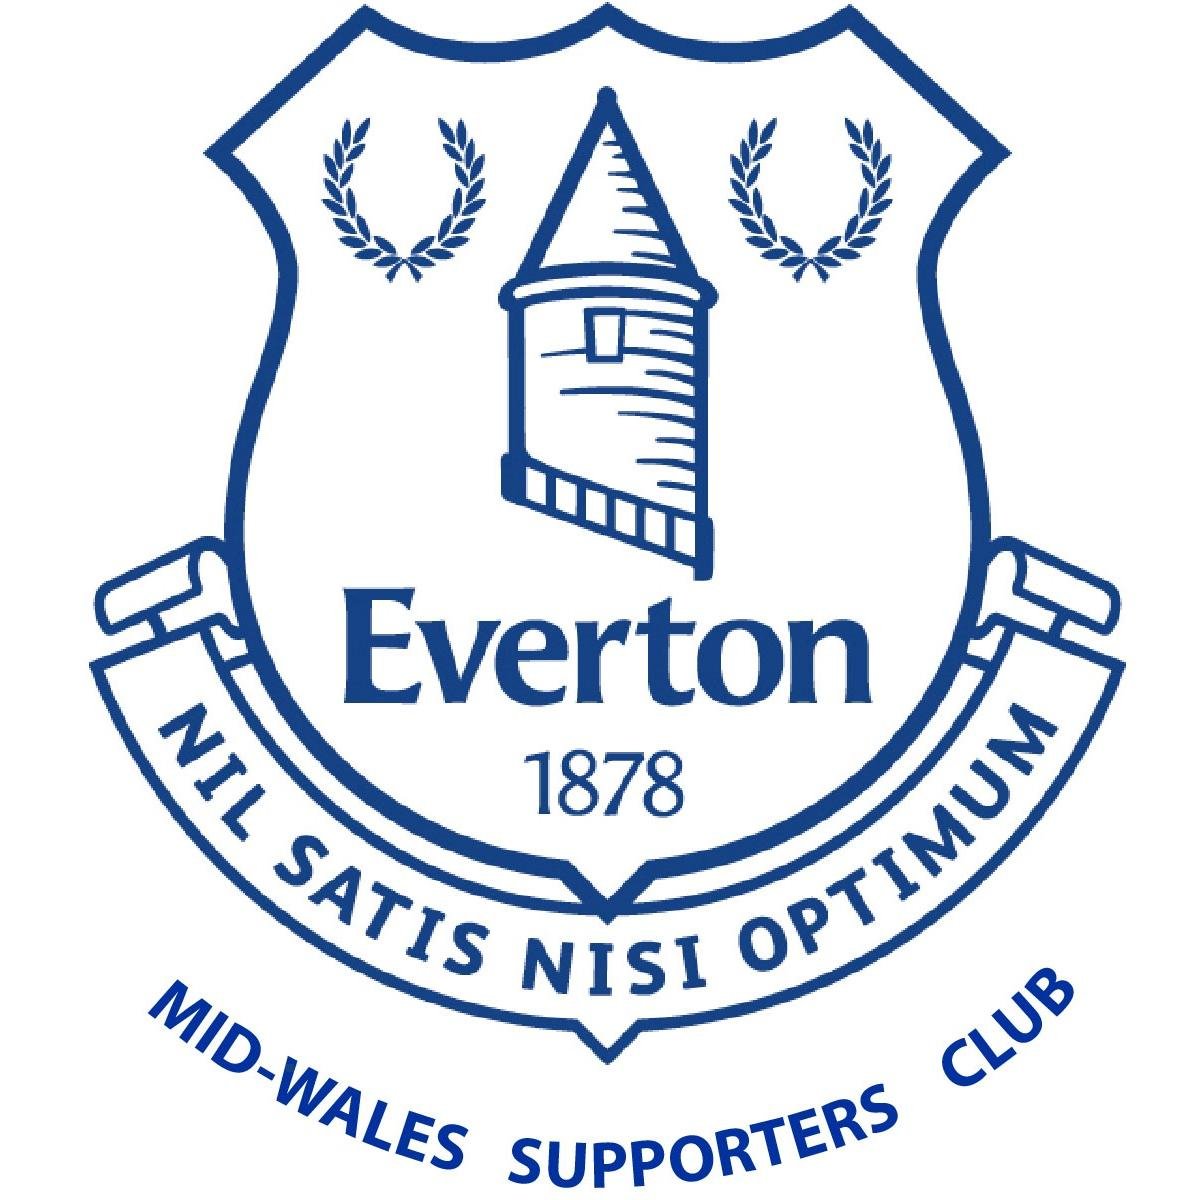 We are an Everton Supporters Club travelling to games from Mid-Wales Contact Kurt: midwalesevertonians@yahoo.co.uk